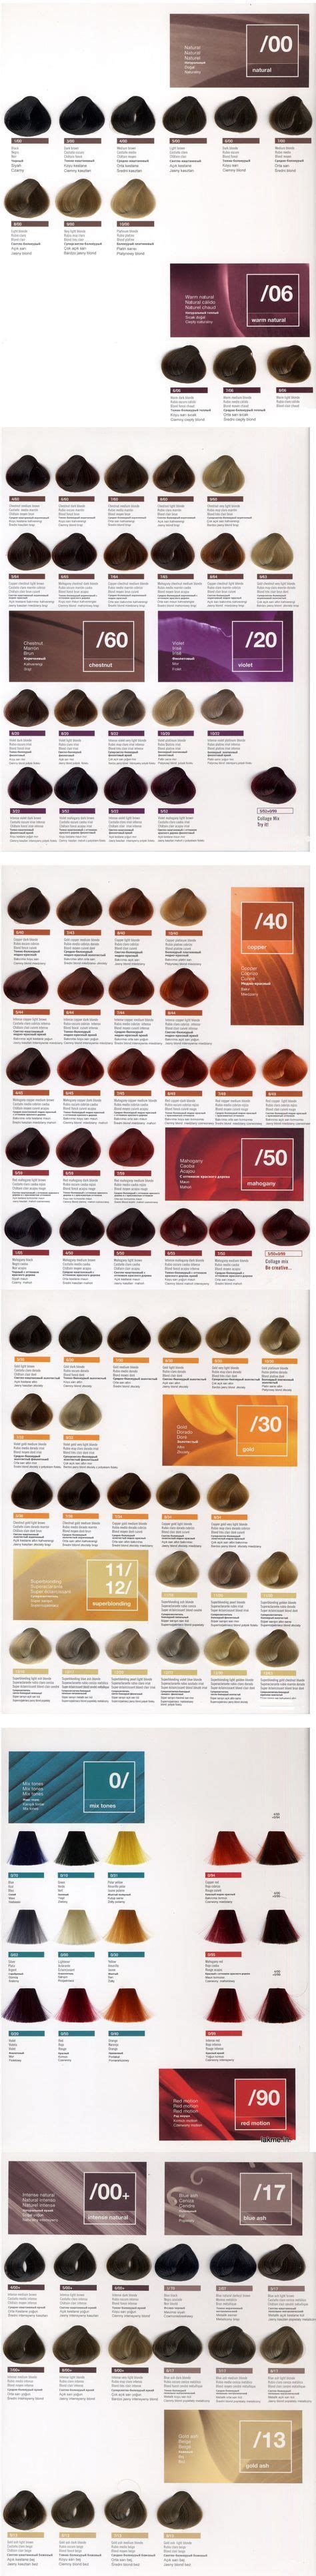 Xpression Hair Color Chart Ranjandesign Xpression Hair Color Chart